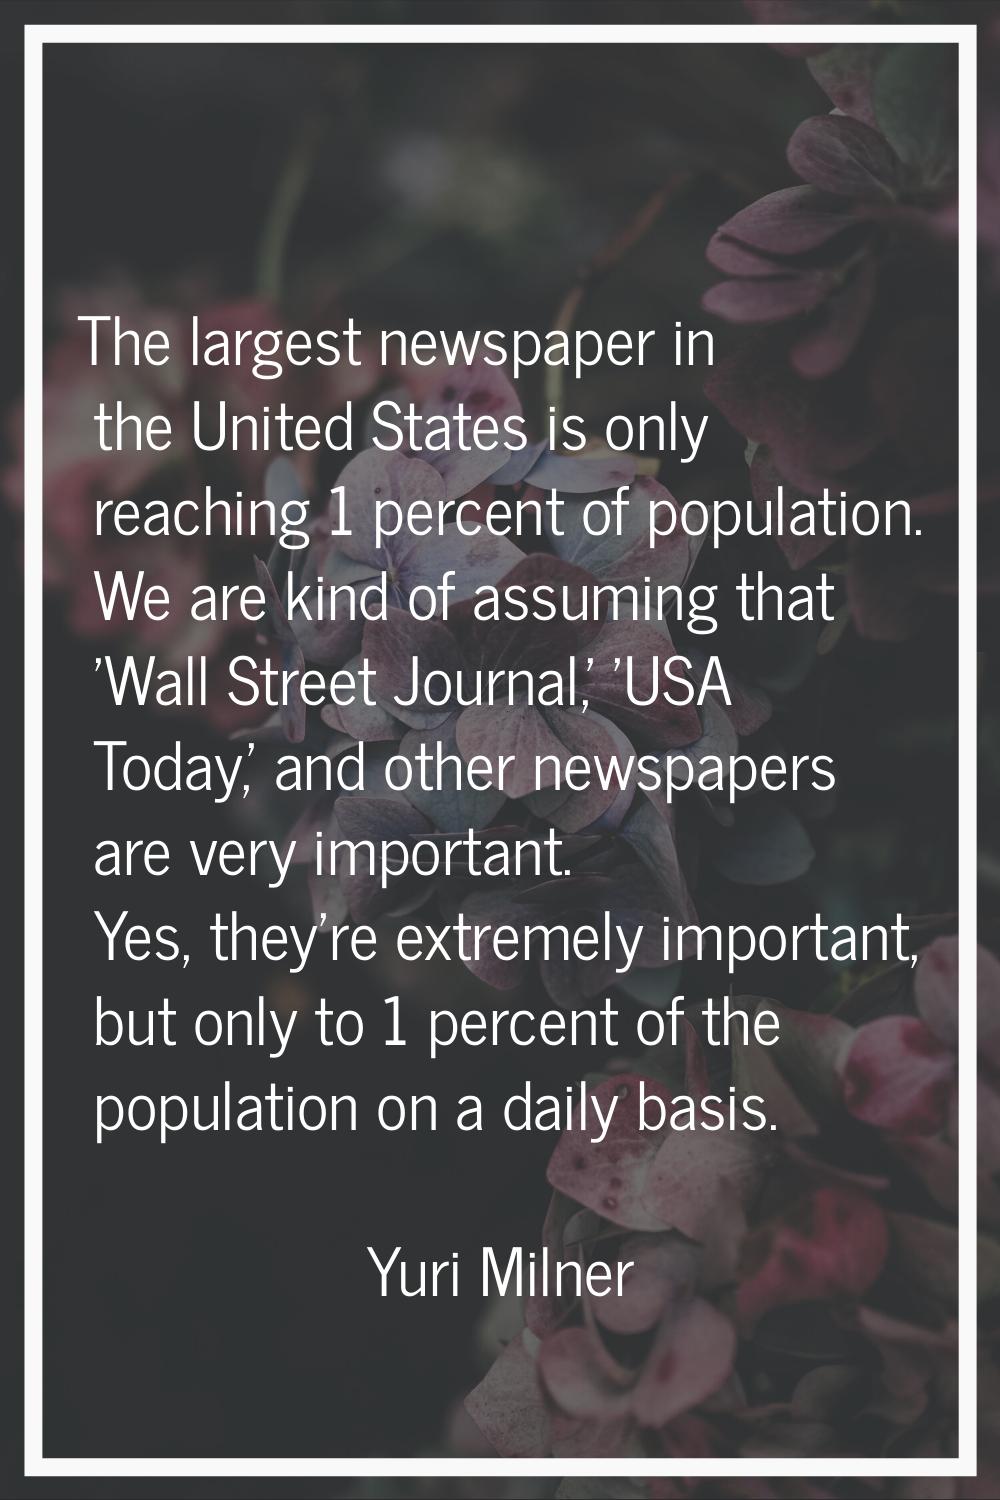 The largest newspaper in the United States is only reaching 1 percent of population. We are kind of